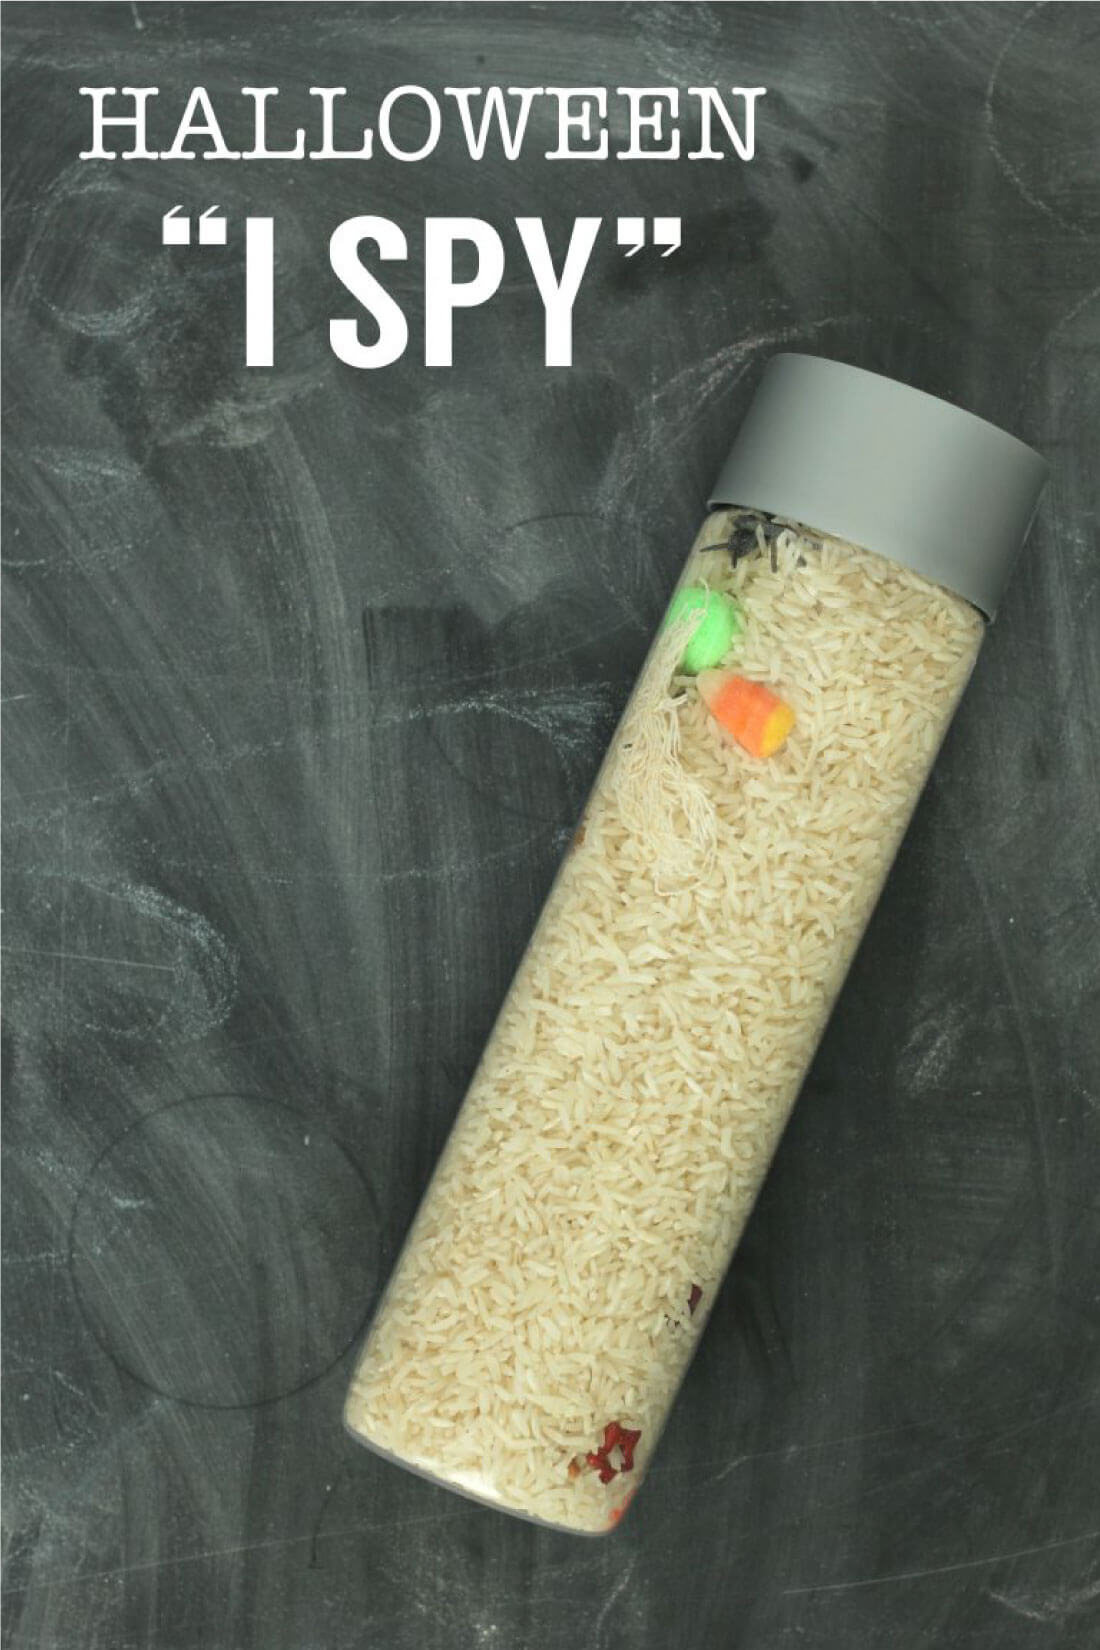 Halloween I Spy Game - really simple and fun to put together for the holiday!